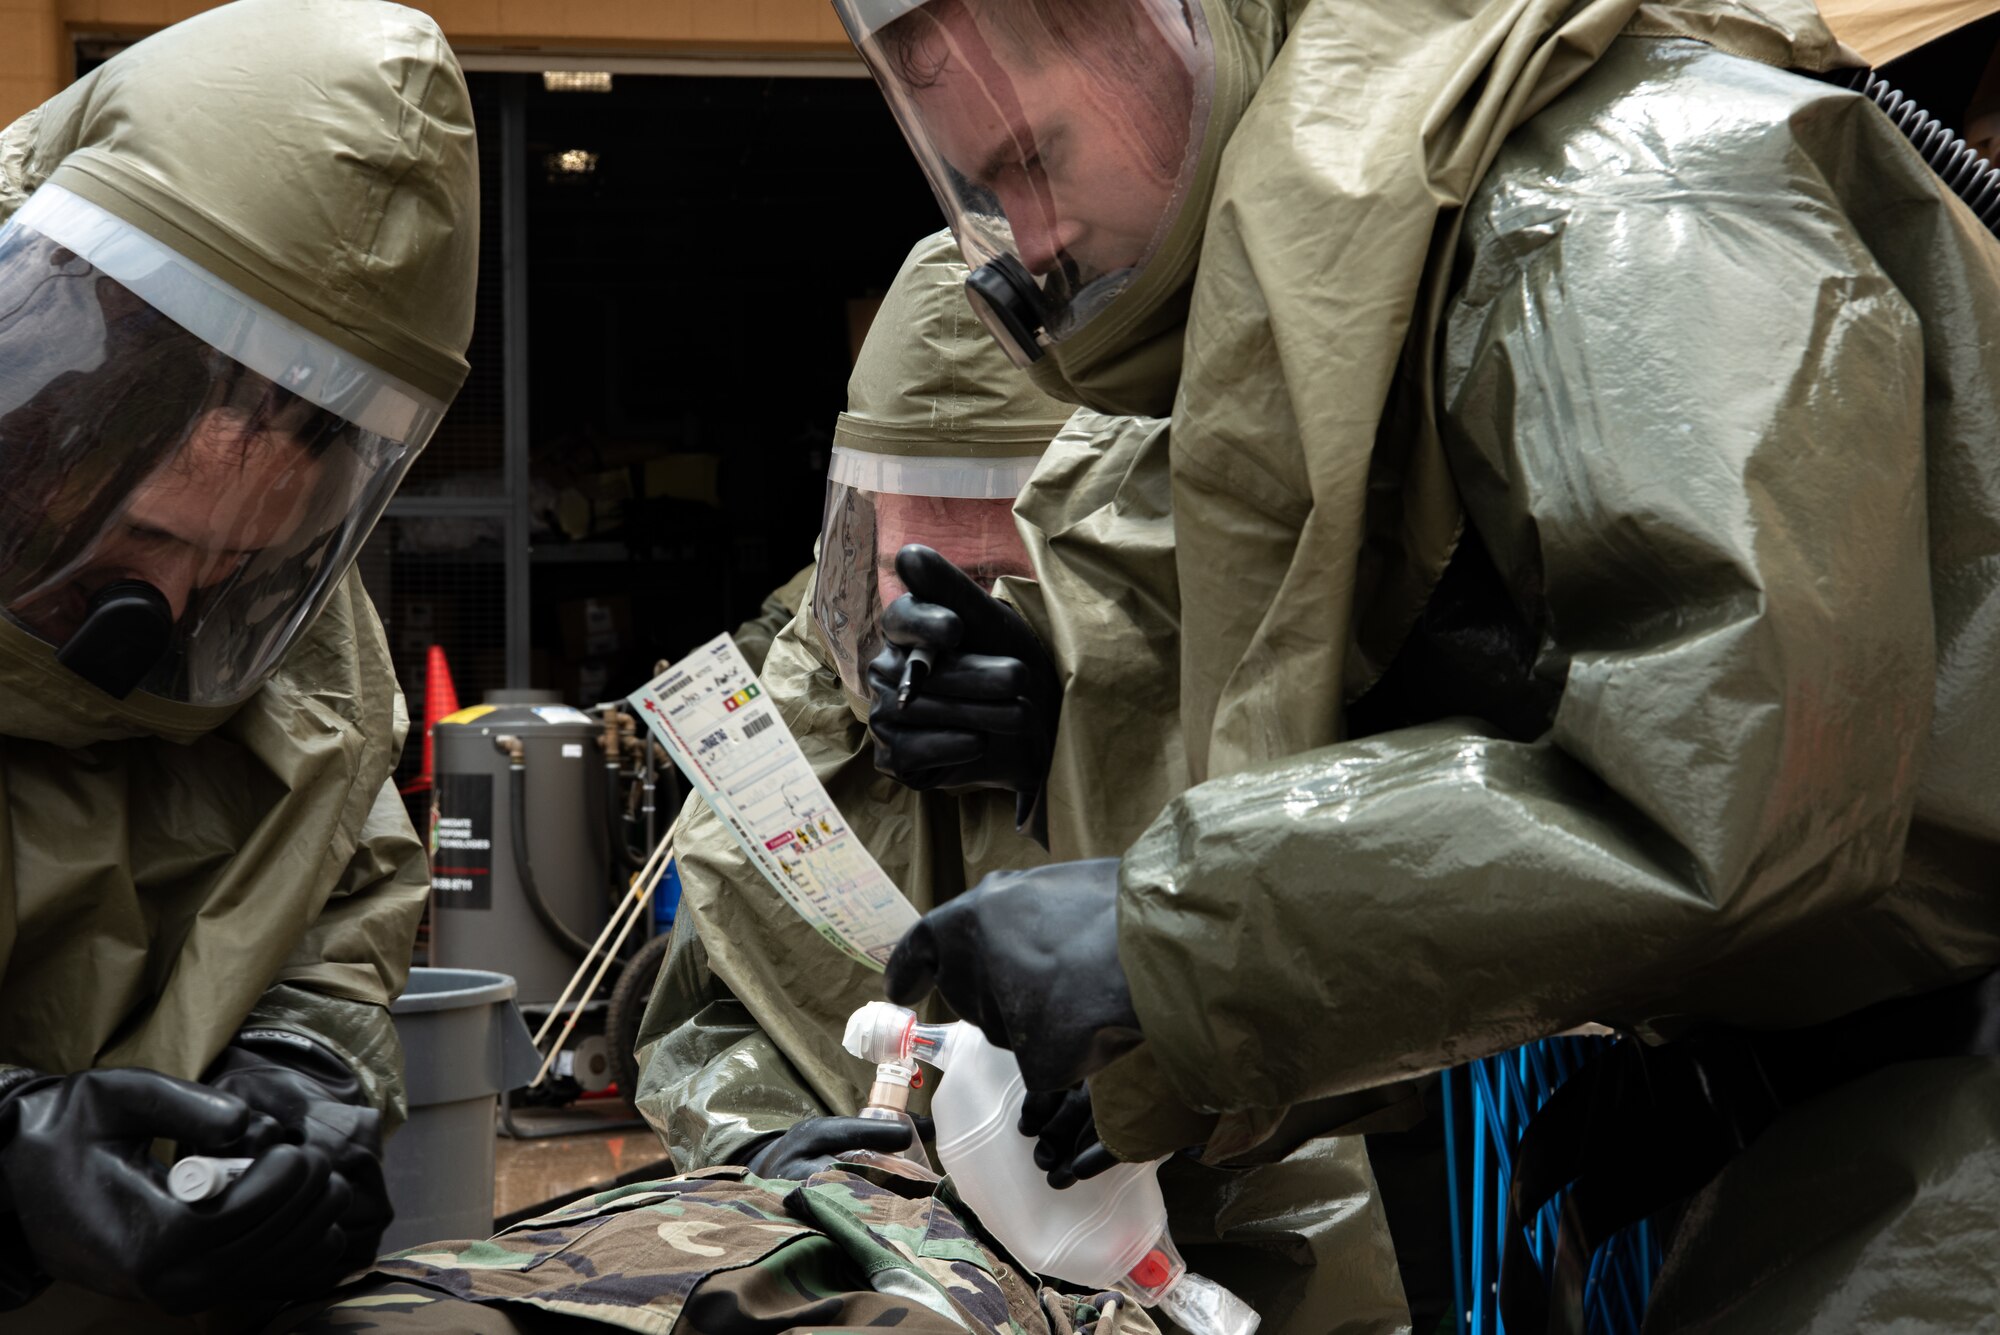 Airmen from the 7th Medical Group perform triage care in protective suits during a decontamination exercise at Dyess Air Force Base, Texas, June 1, 2023.The exercise required the completion of a three-day training course that tested Airmen’s medical disaster response. (U.S. Air Force photo by Airman 1st Class Alondra Cristobal Hernandez)